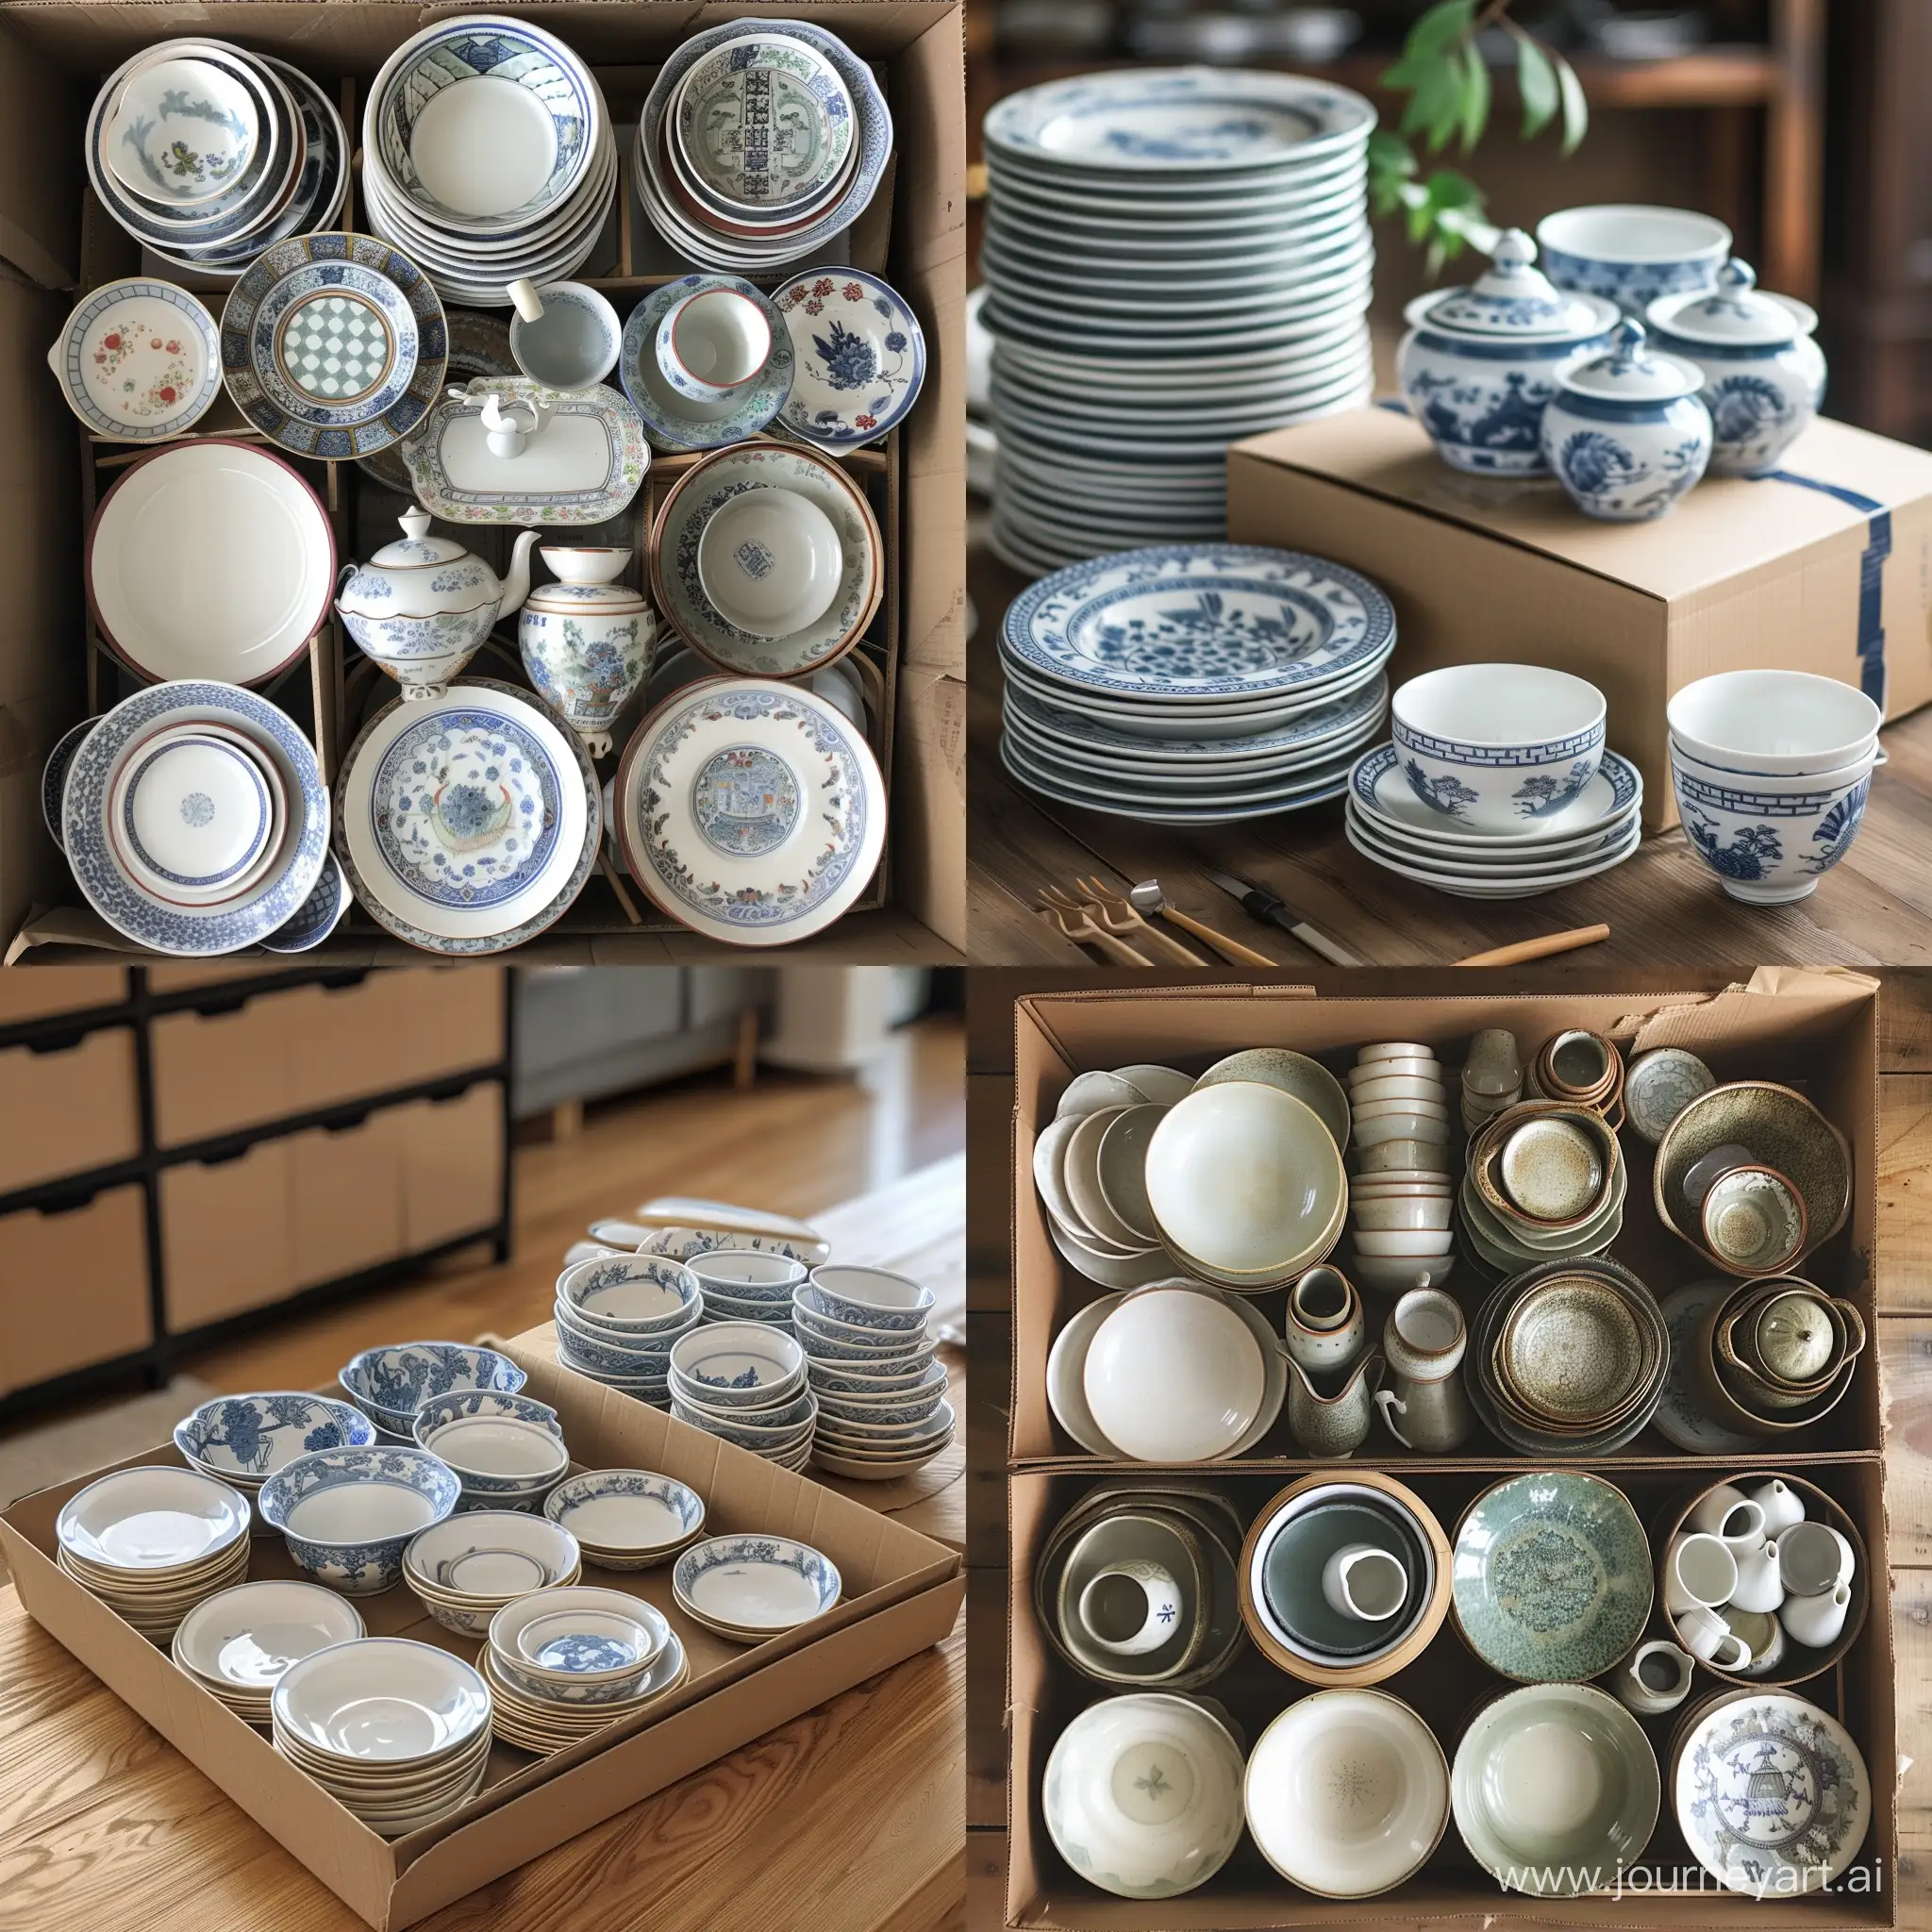 Unpacking-Chinese-Tableware-Elegant-Arrivals-in-a-11-Aspect-Ratio